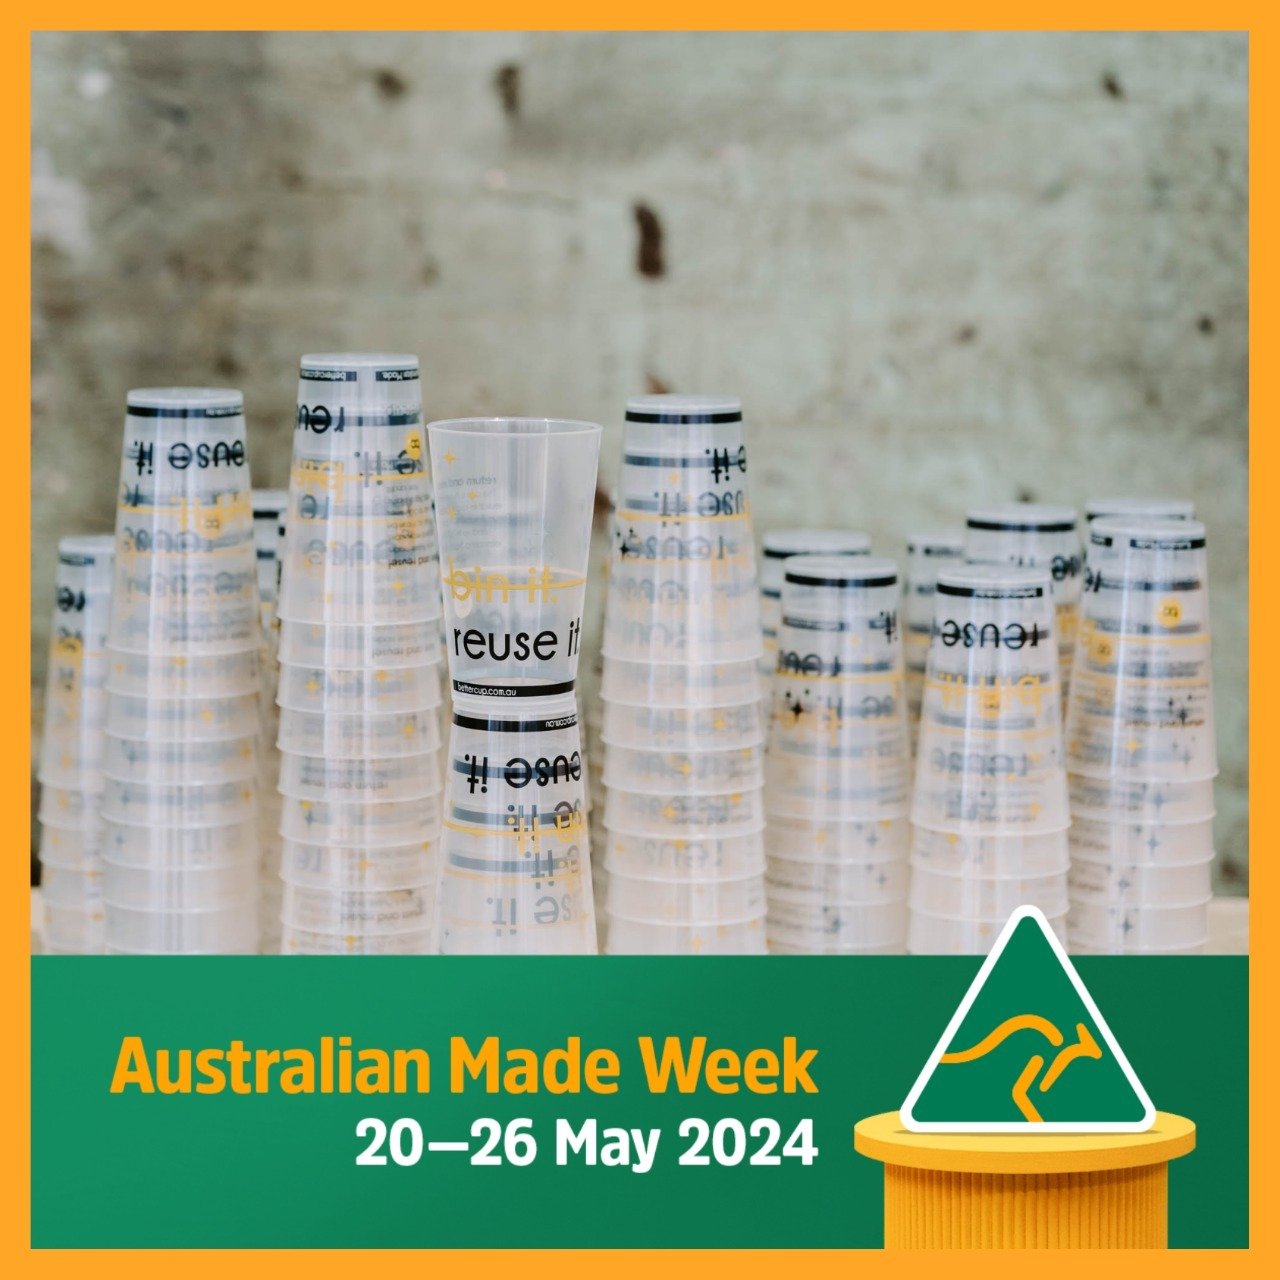 This week, we are celebrating all things Australian Made! 💛💚

As we join in the celebration, we are excited to share some snapshots of our cups that are proudly made in Australia. 

Each cup is crafted with utmost quality to exemplify the excellenc